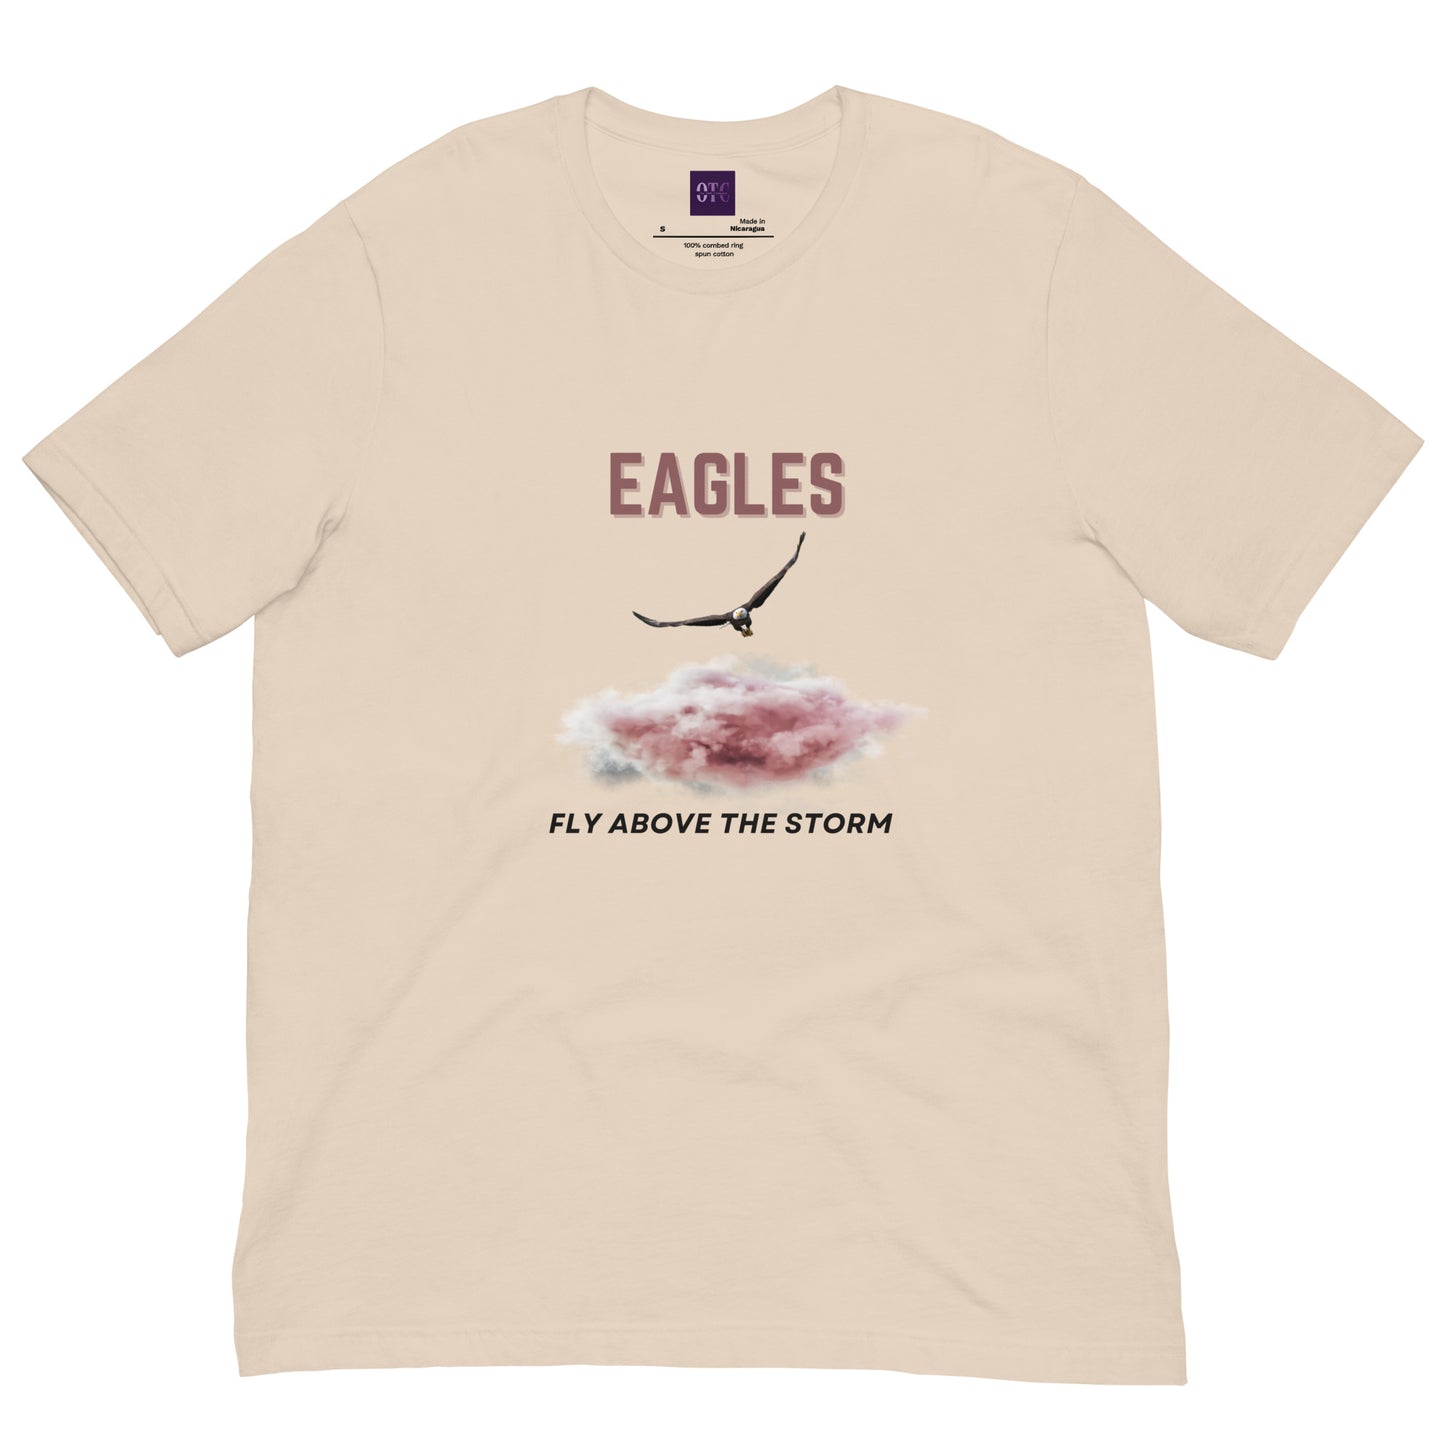 "Eagles Fly above the Storm" Unisex T-shirt (2 Color Options)